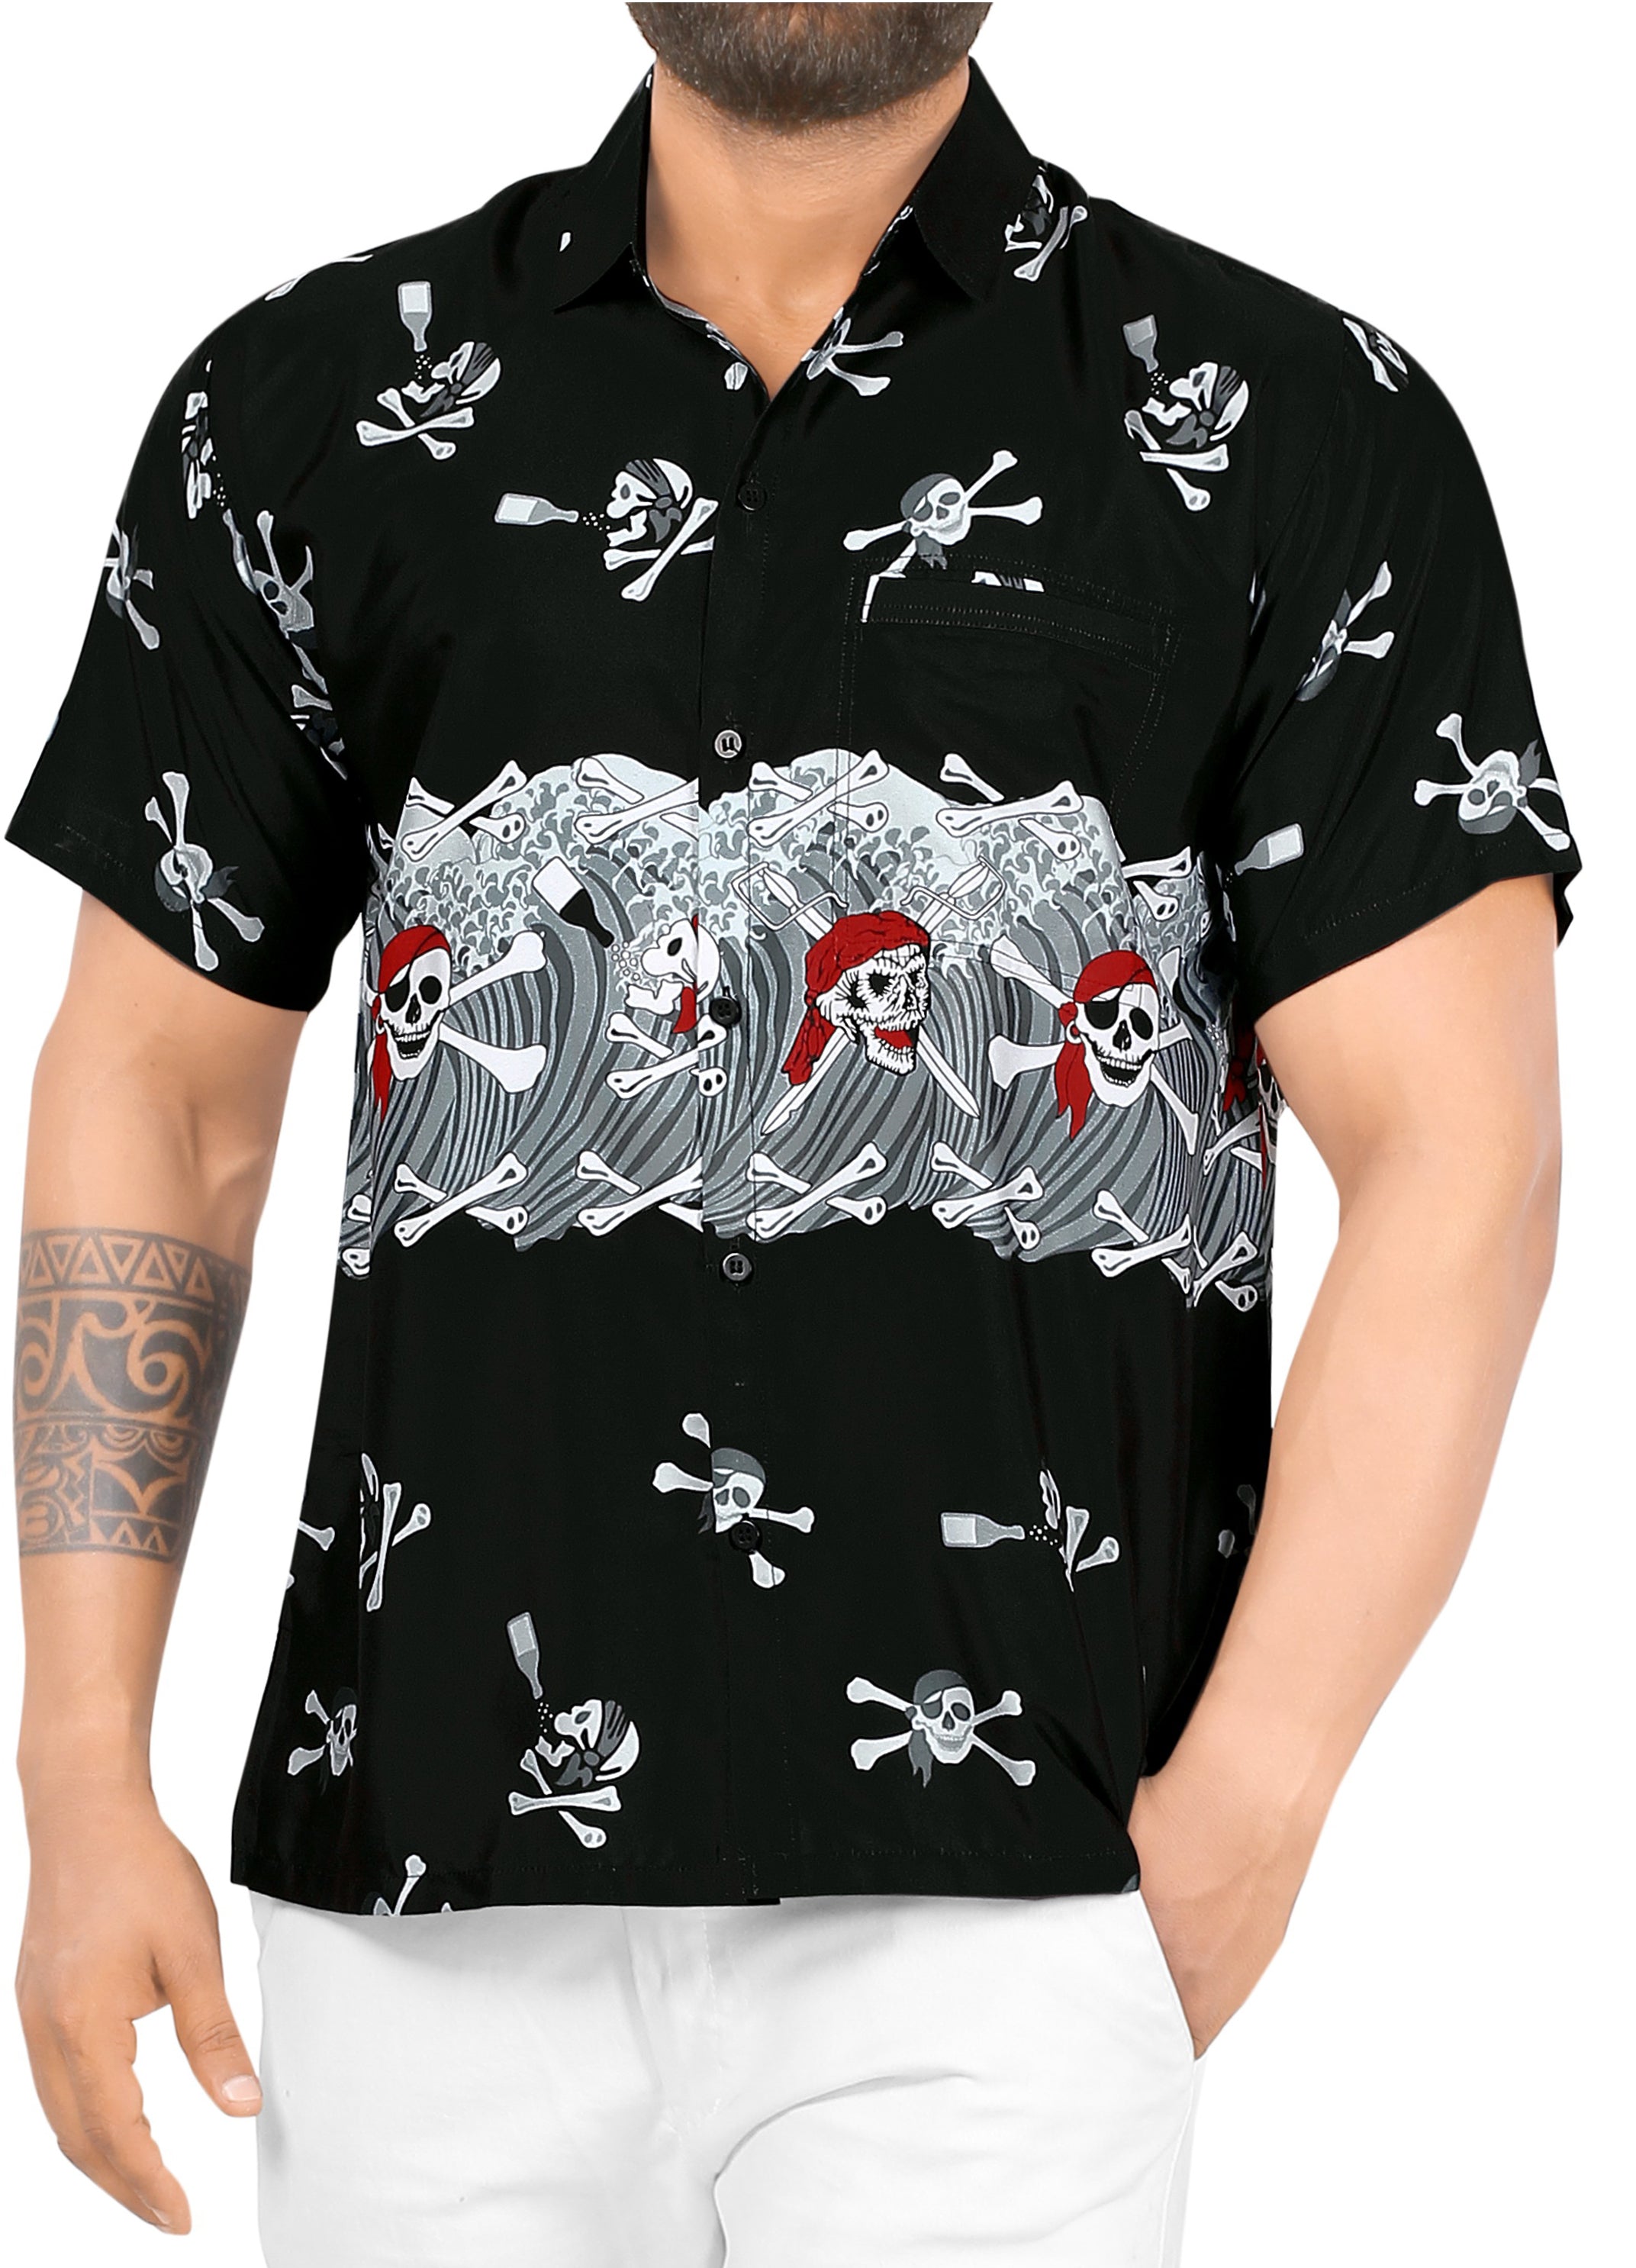  Pirate Skull Men's Polo Shirts Casual Short Sleeve